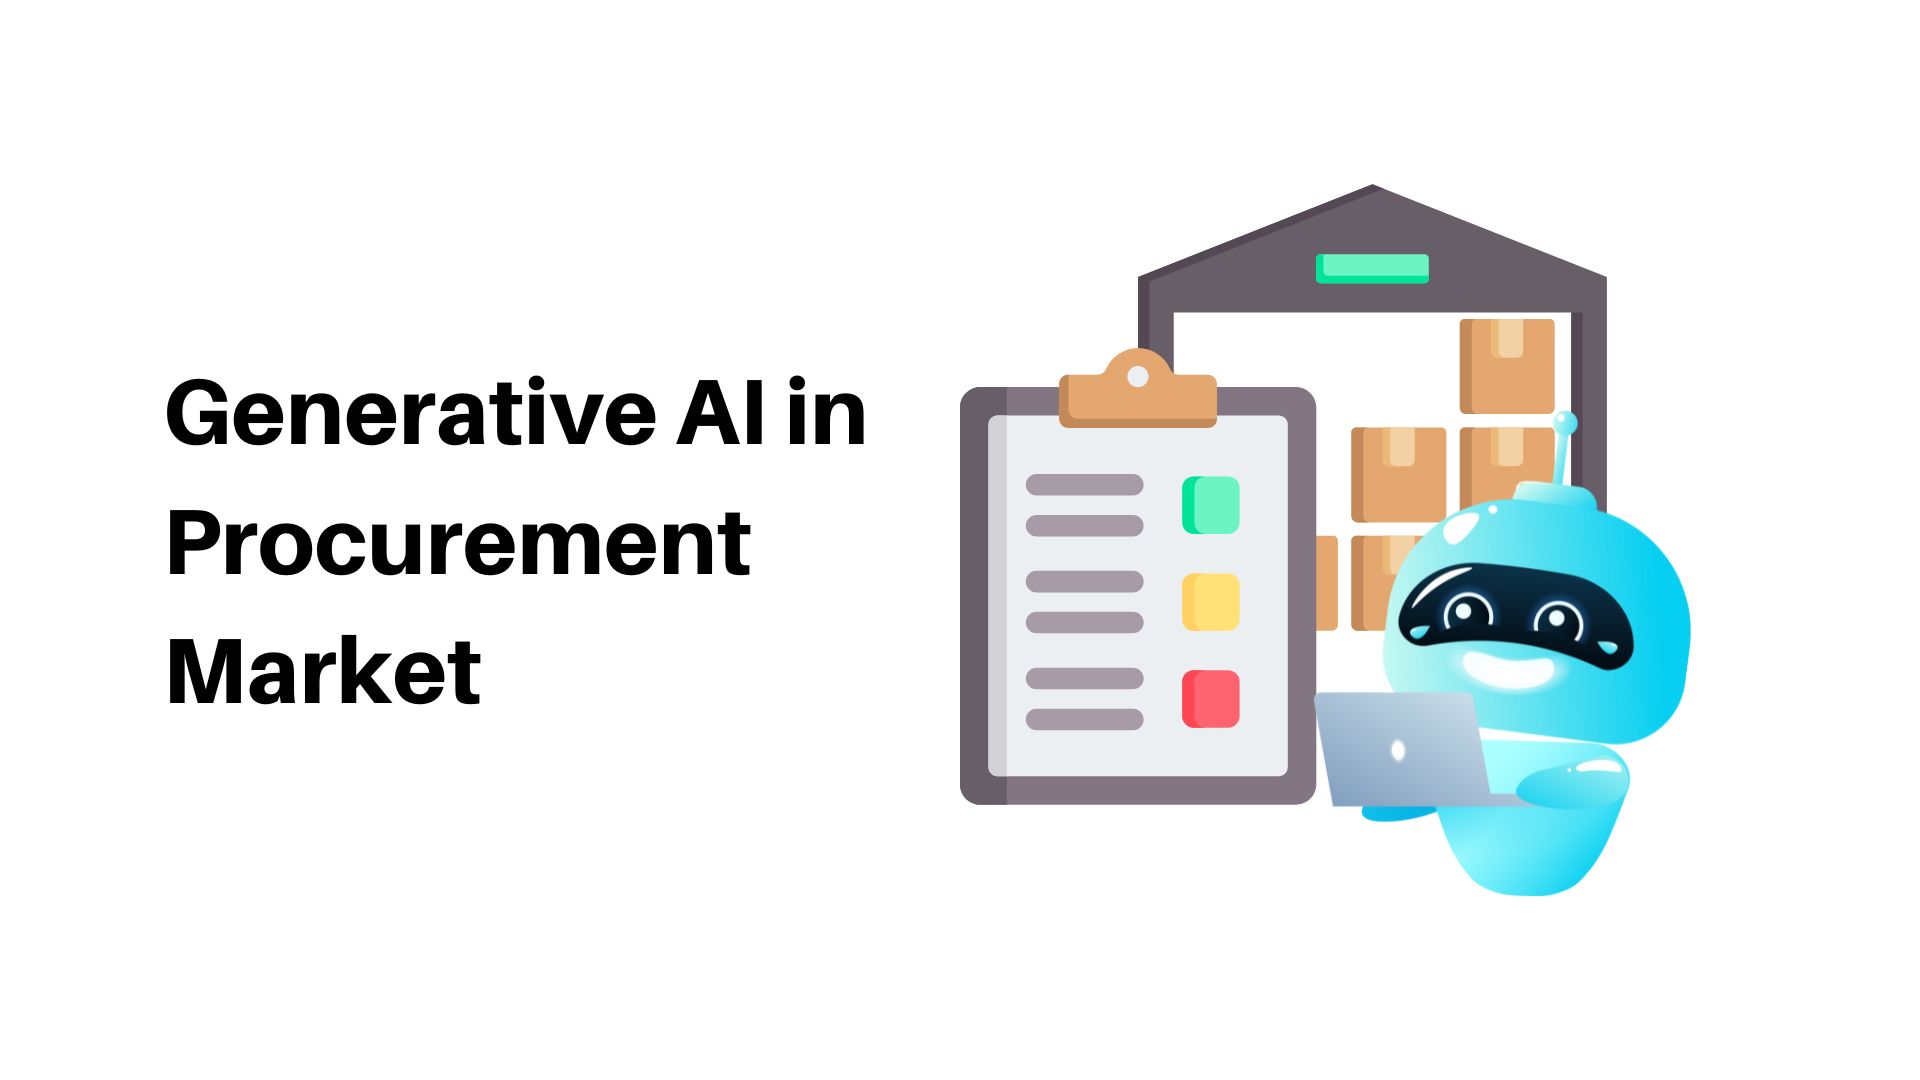 Generative AI in Procurement Market Expected to Drive Growth at a CAGR of 33% through 2032